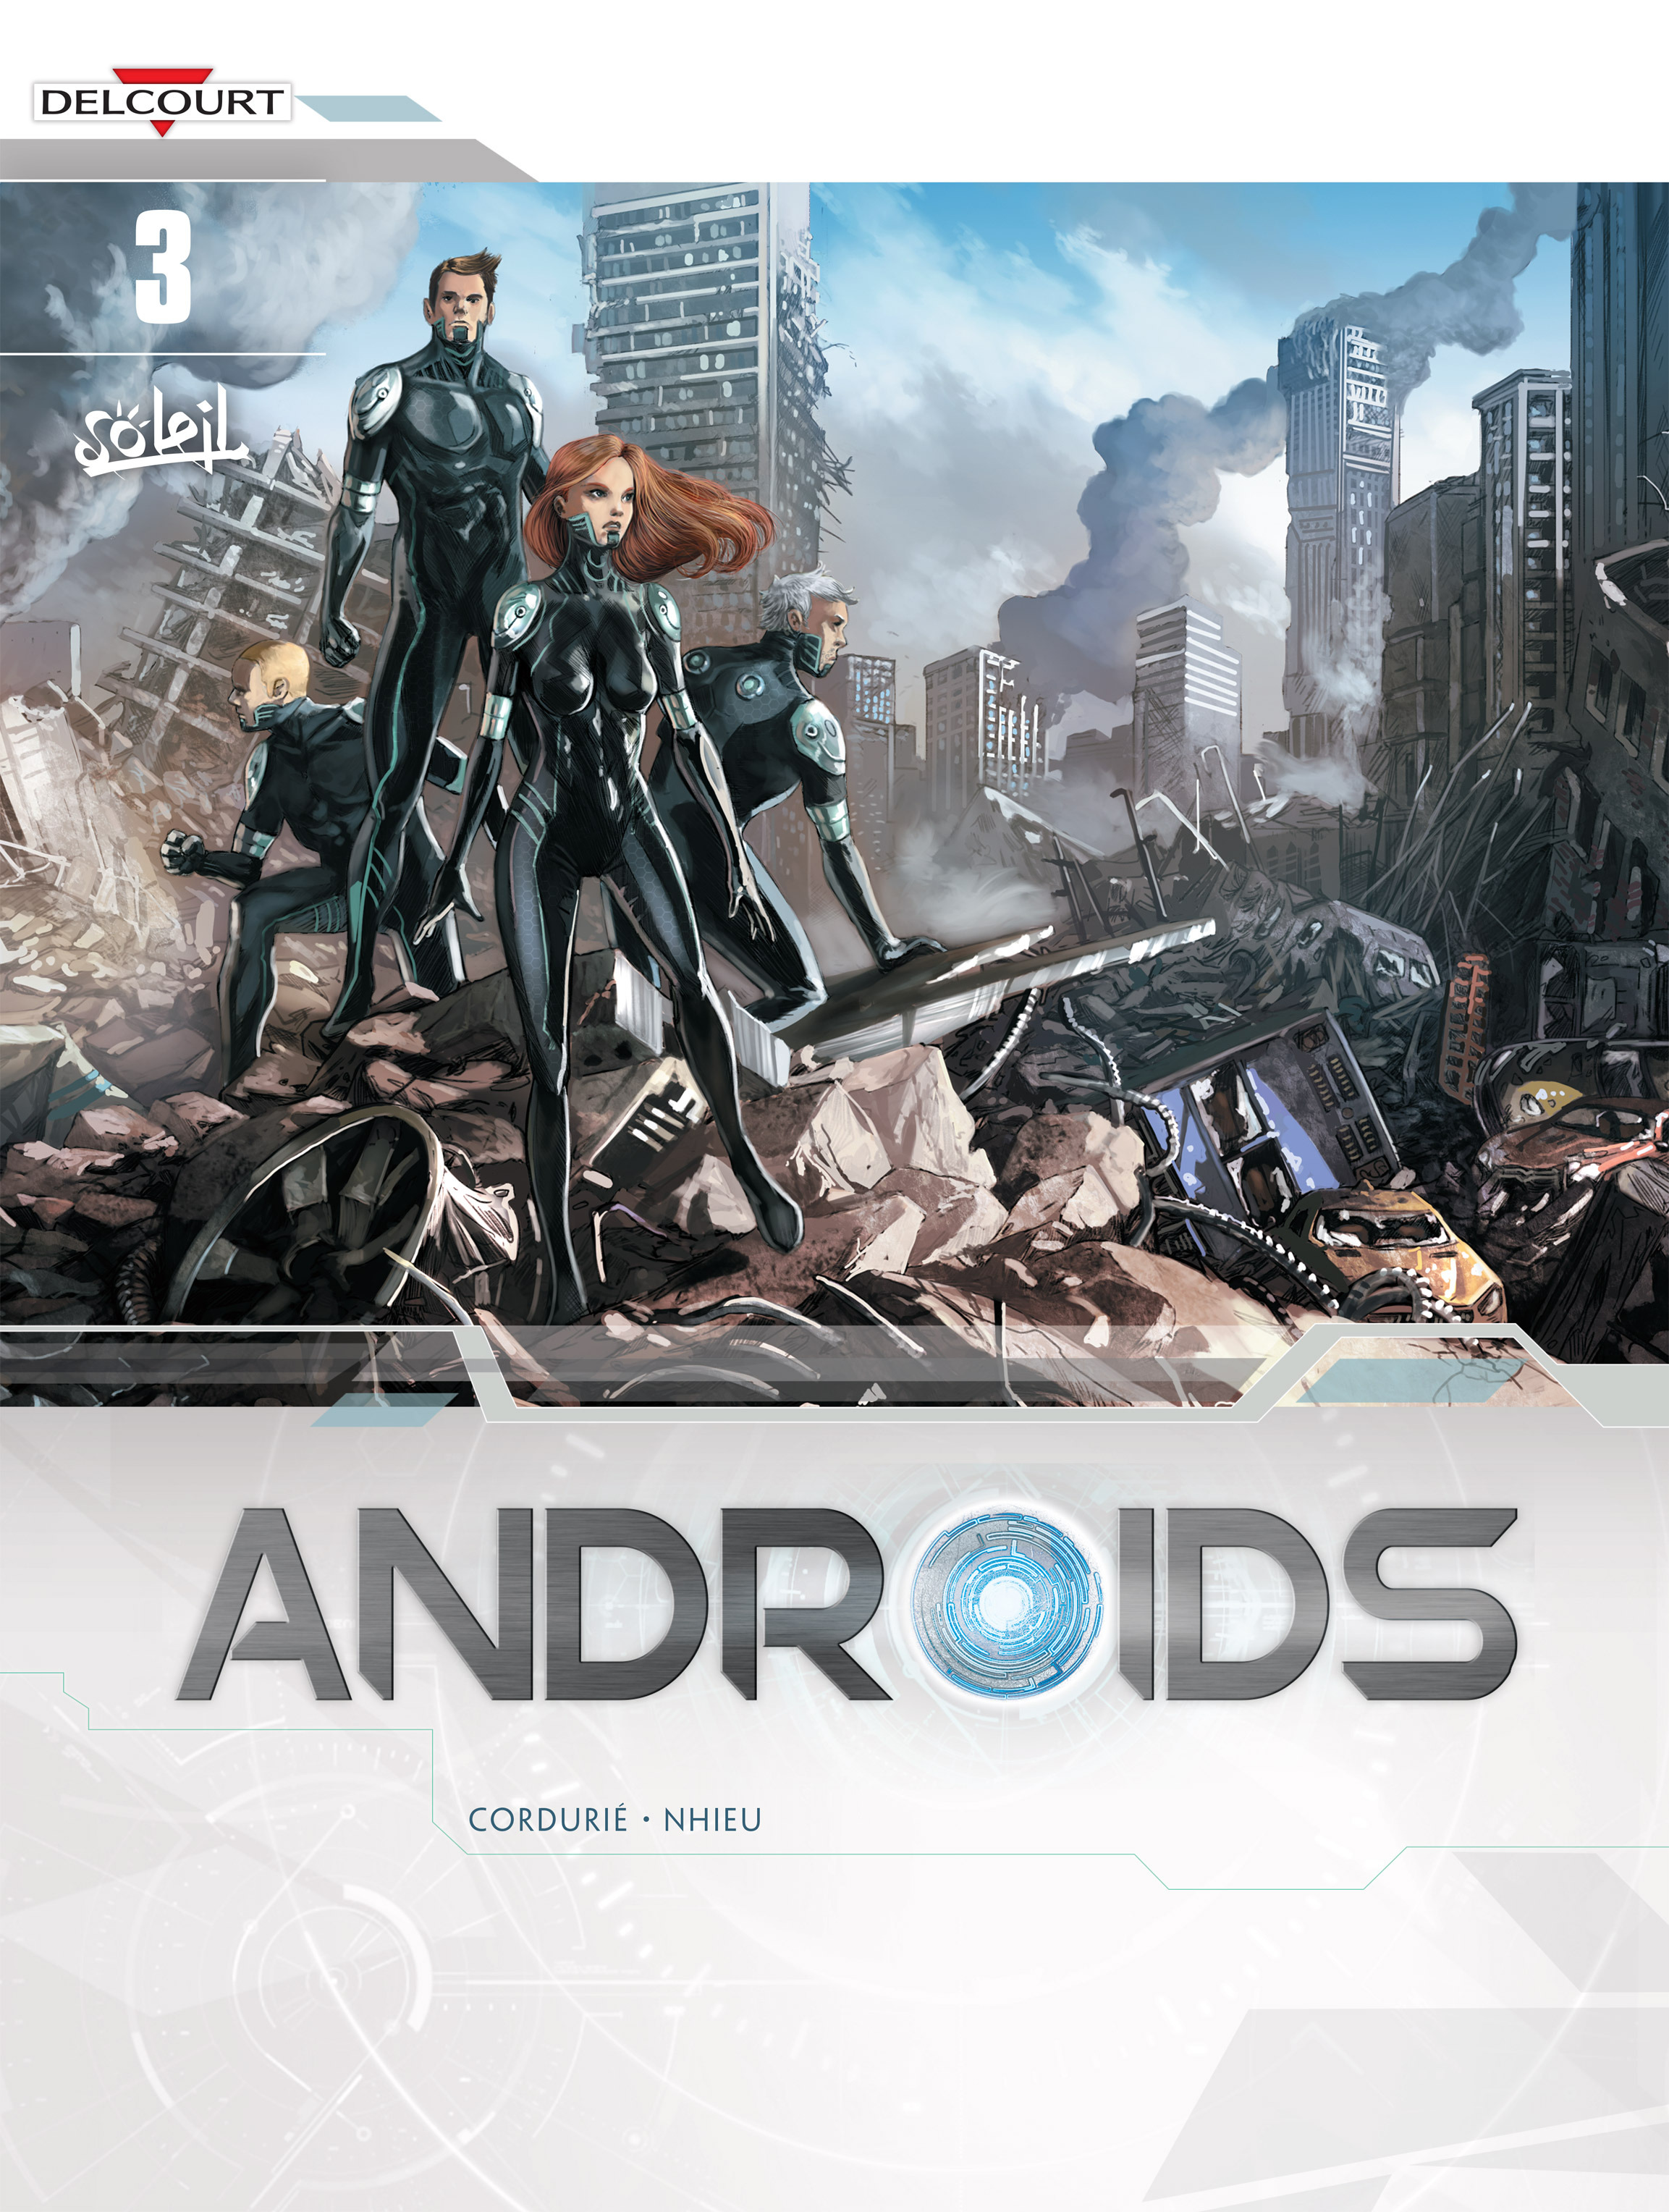 Read online Androïds comic -  Issue #3 - 1